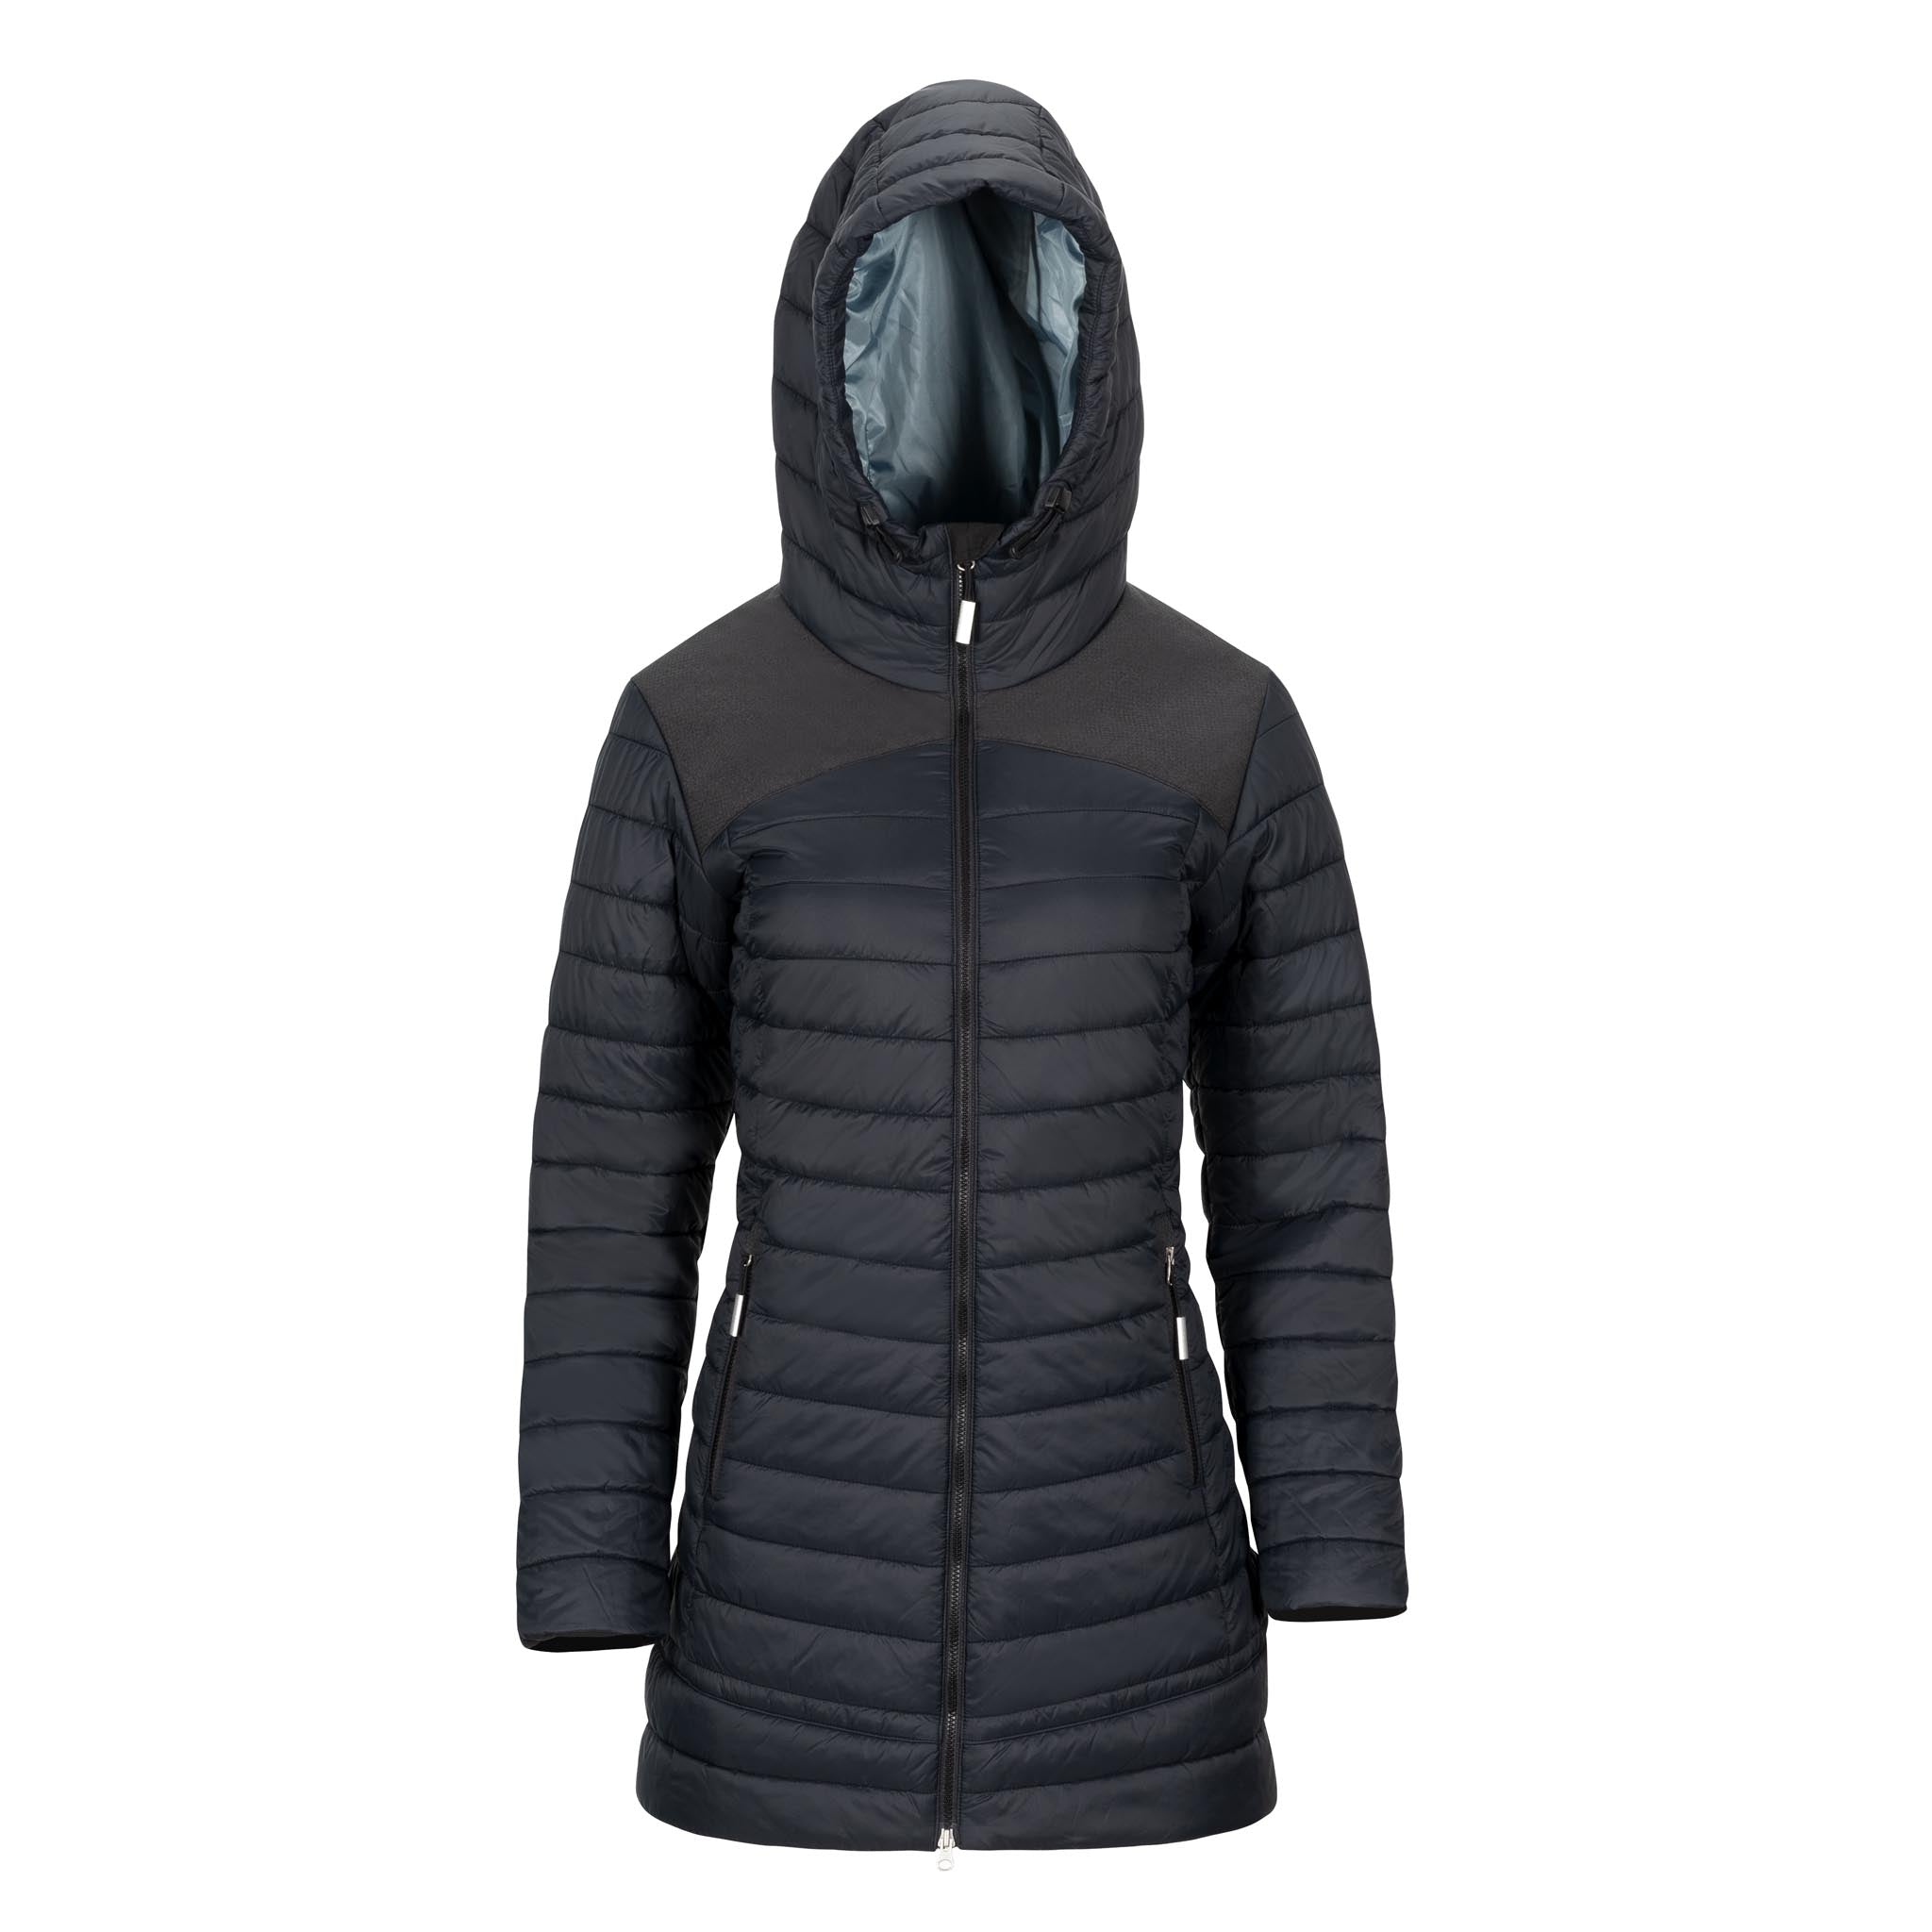 sync-performance-womens-apres-puffy-jacket-black-front